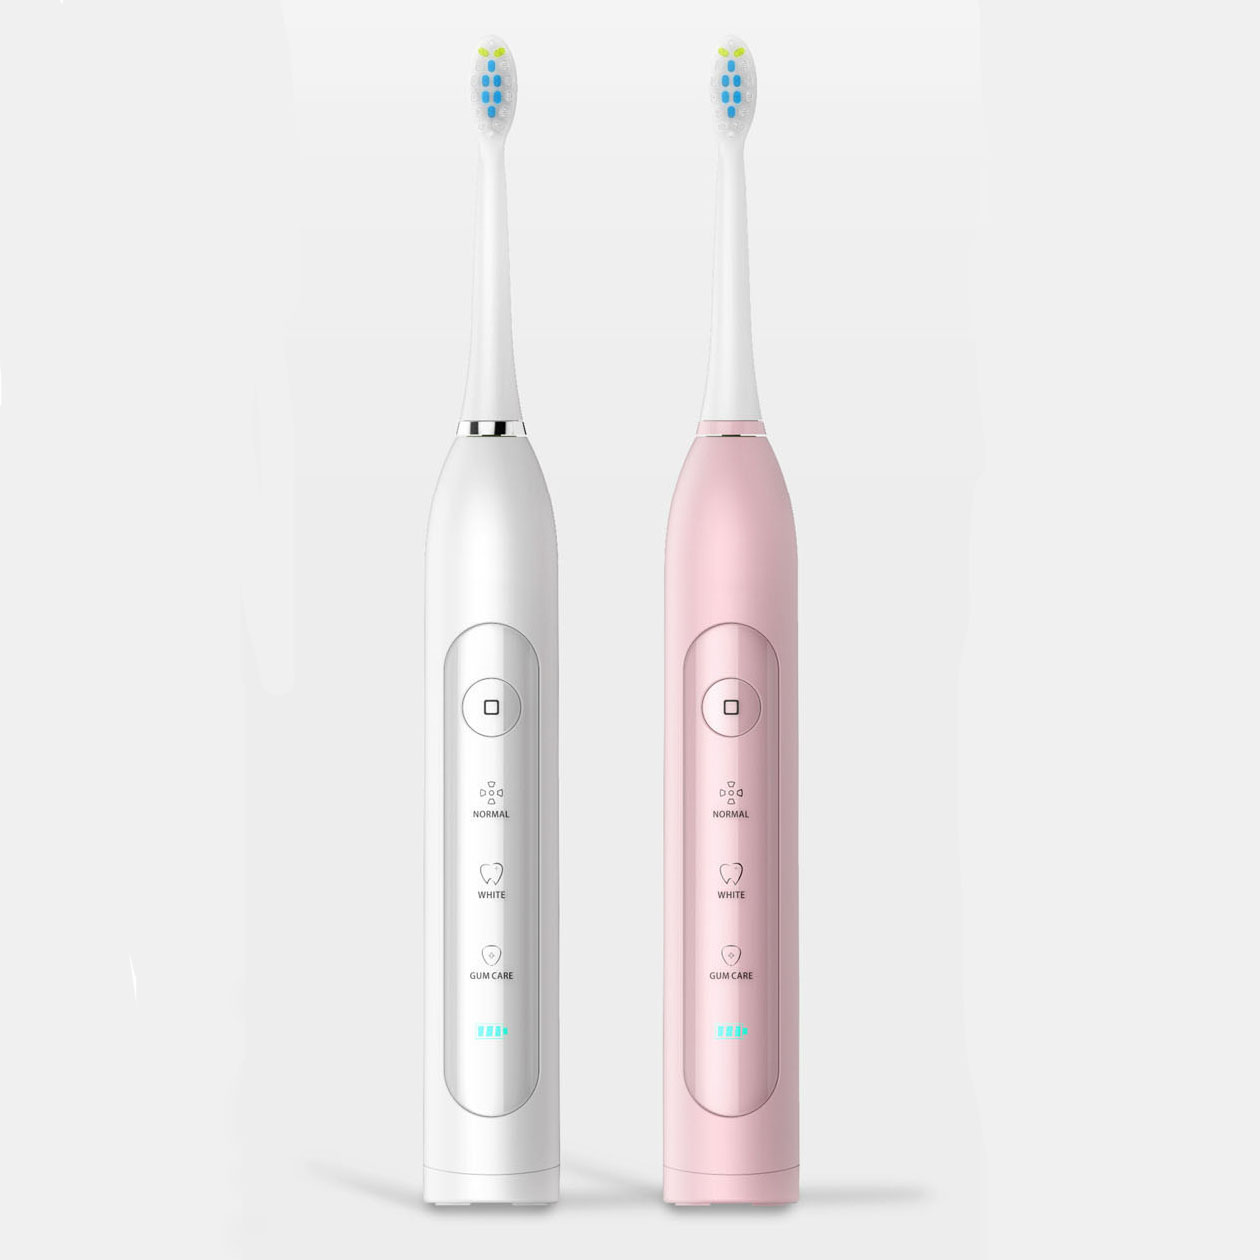 CHIGO-CG-105-Multi-purpose-Sonic-Electric-Toothbrush--3-Brush-Modes-Wireless-USB-Rechargeable-Toothb-1294378-12